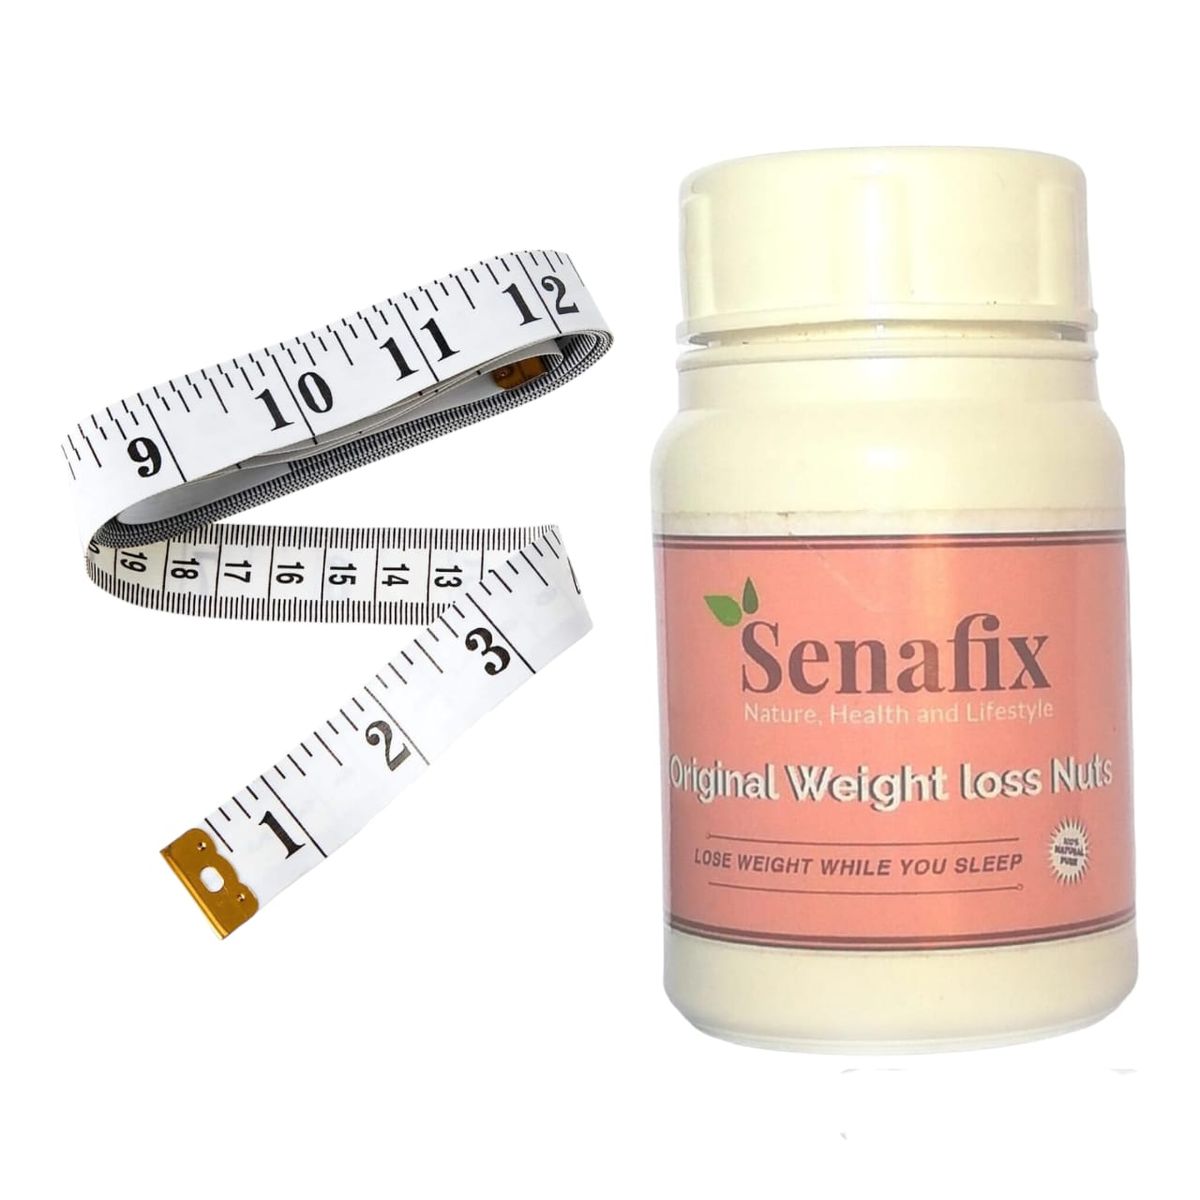 Senafix Weight Loss Nuts for Belly Fat & Body Tape Measure | Shop Today ...